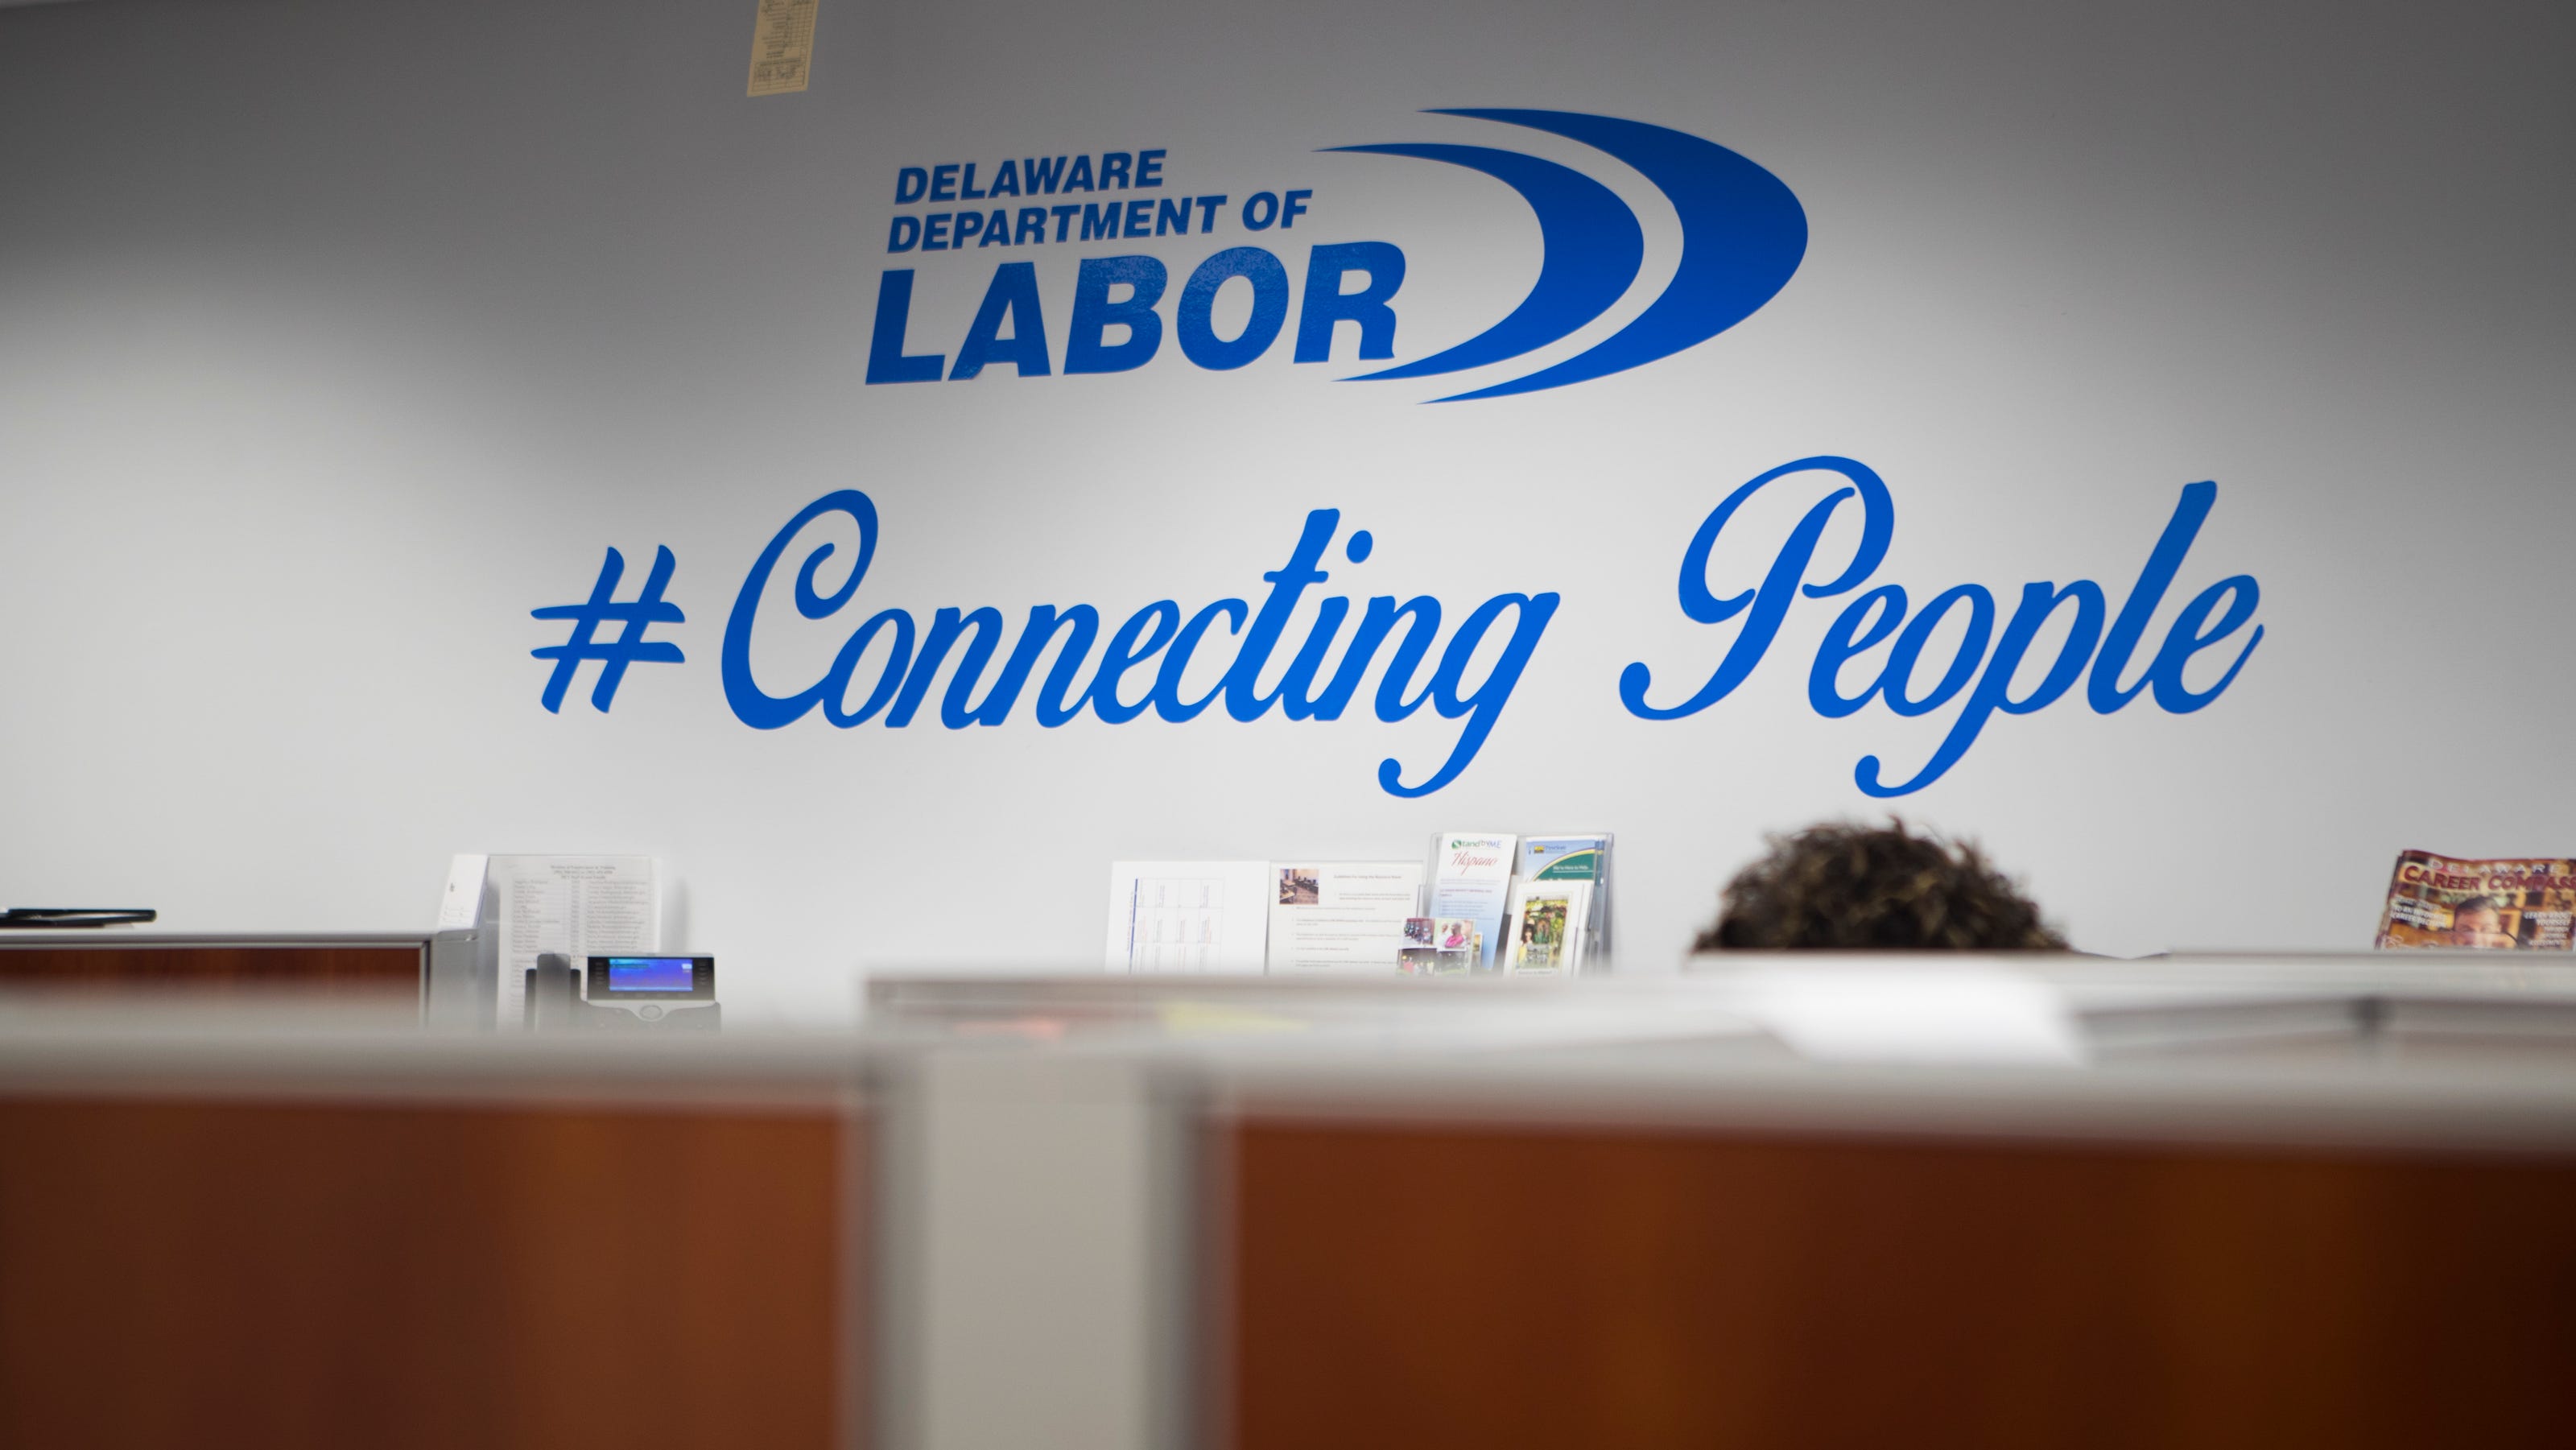 Delaware Labor Department will apply for new COVID19 unemployment program